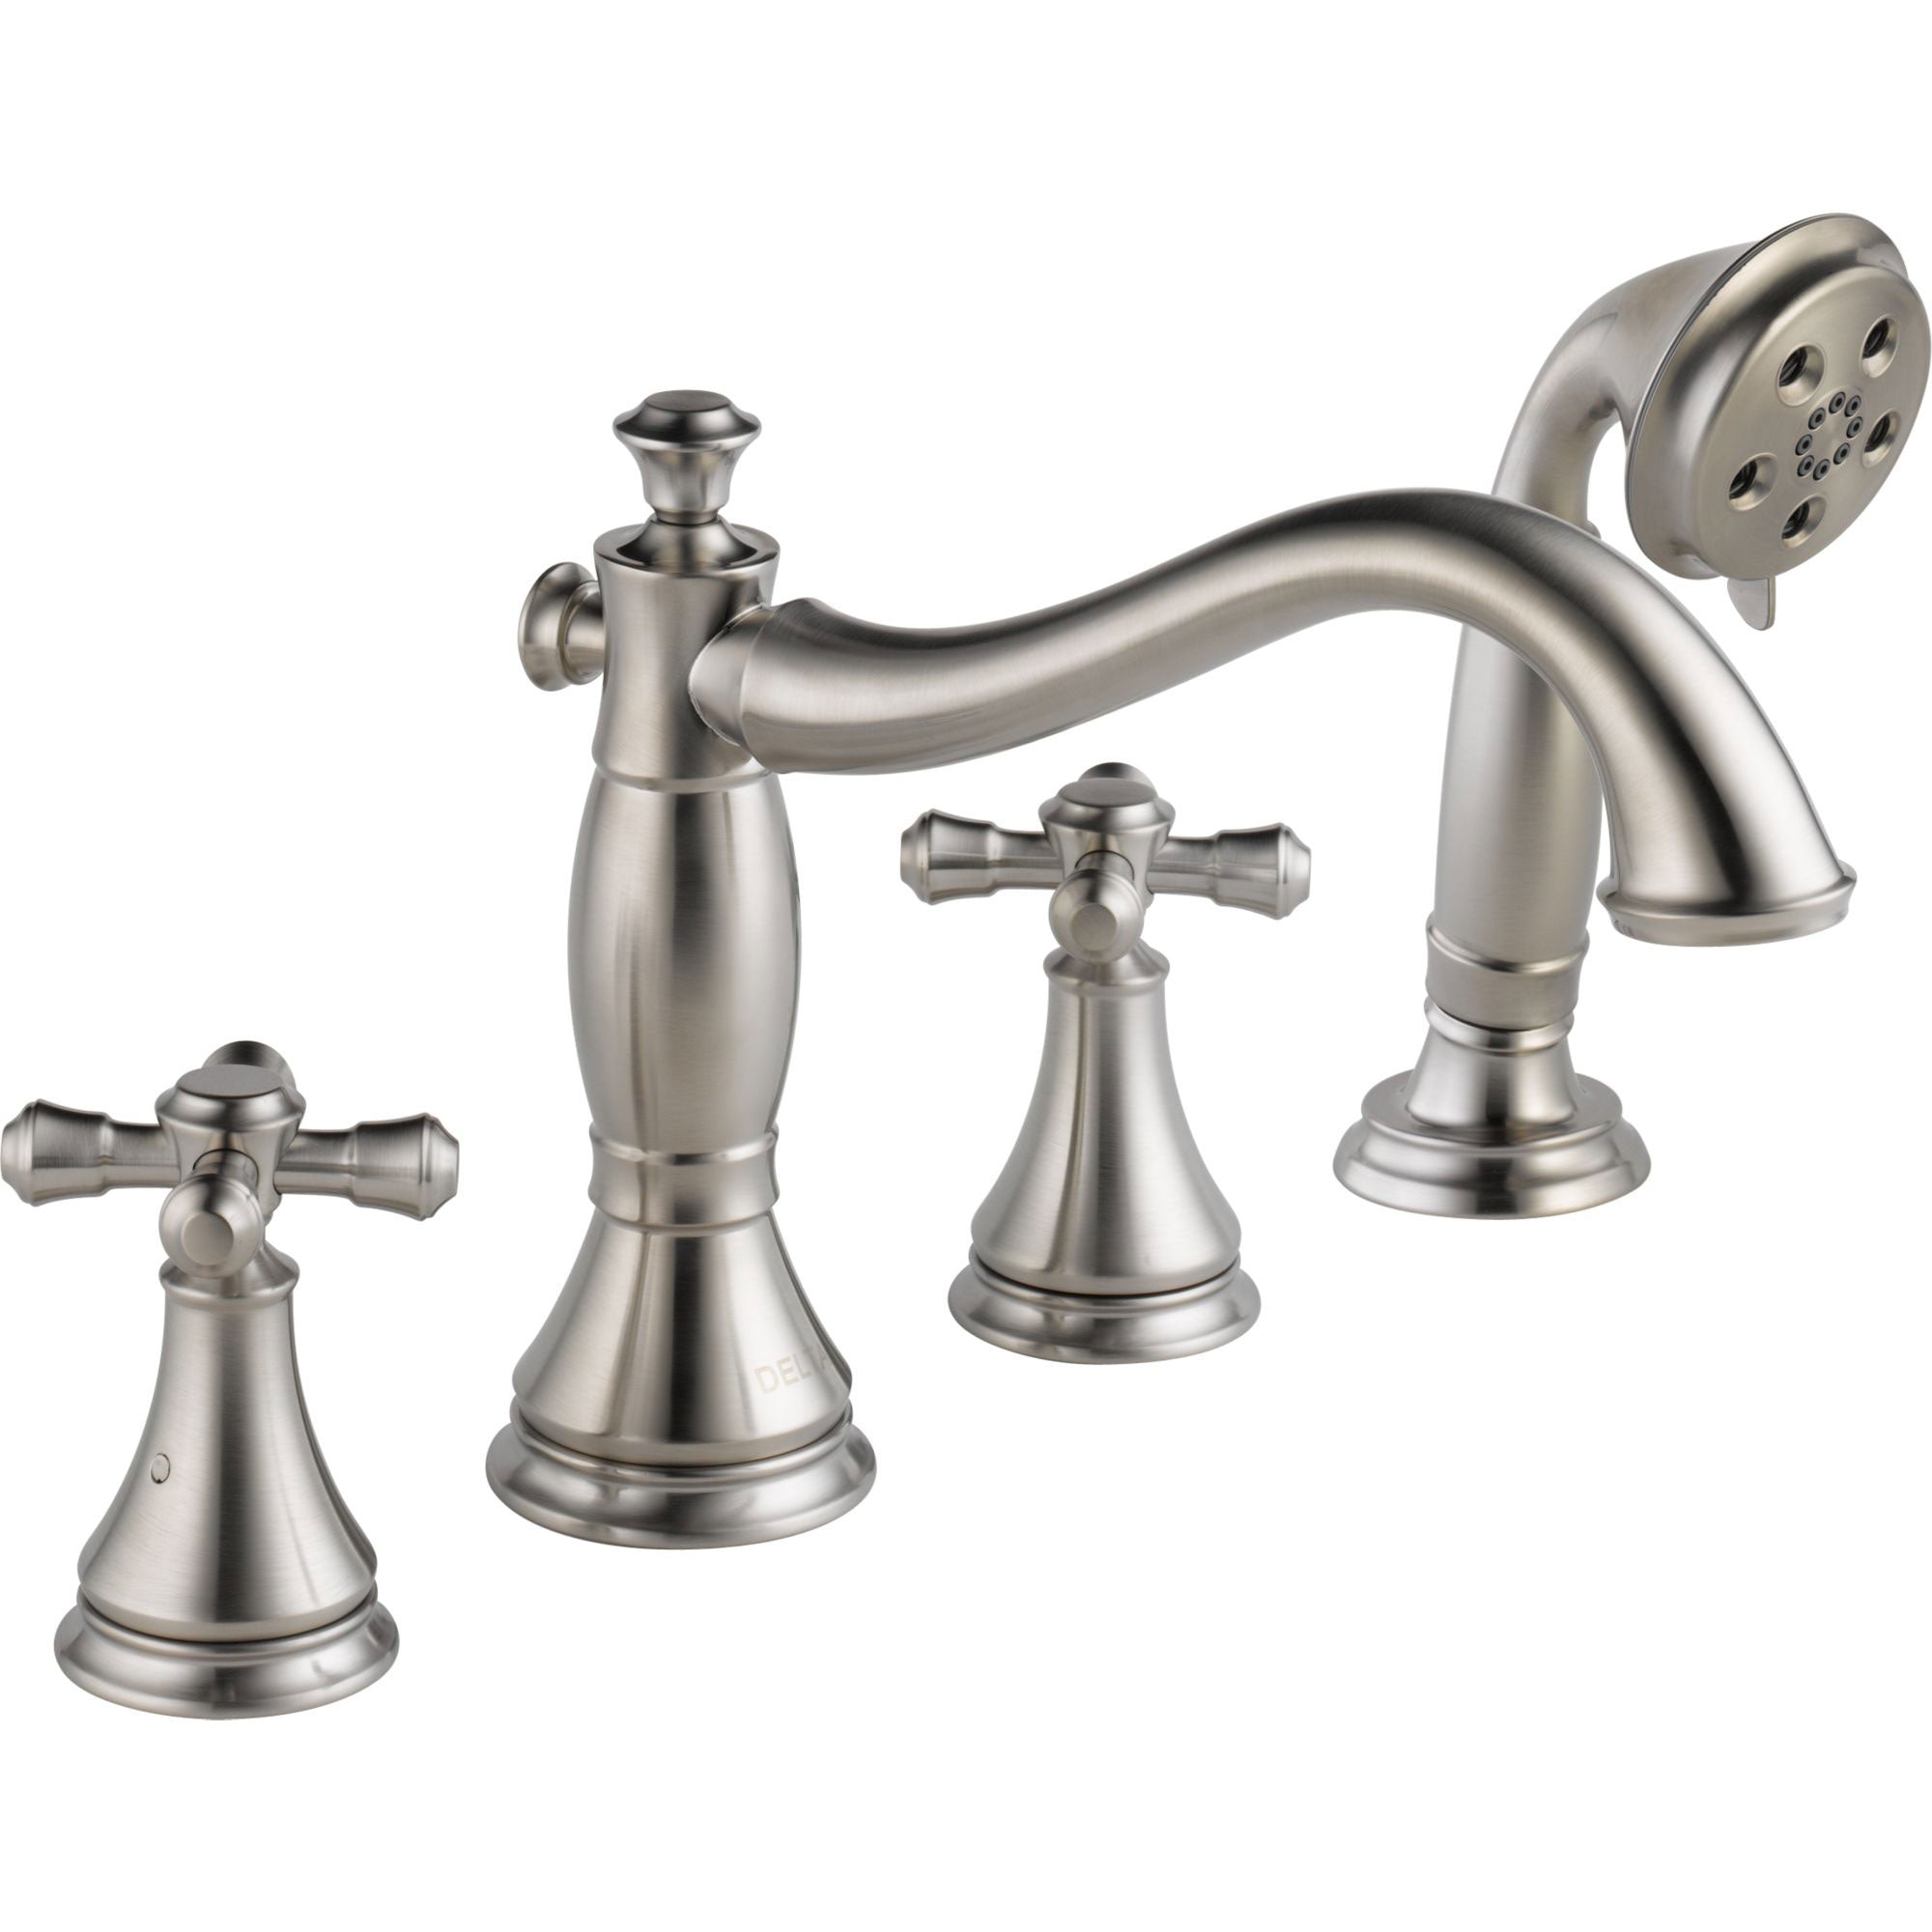 Delta Cassidy Stainless Steel Finish Roman Tub Filler Faucet with Hand Shower Spray INCLUDES Valve and Cross Handles D1063V